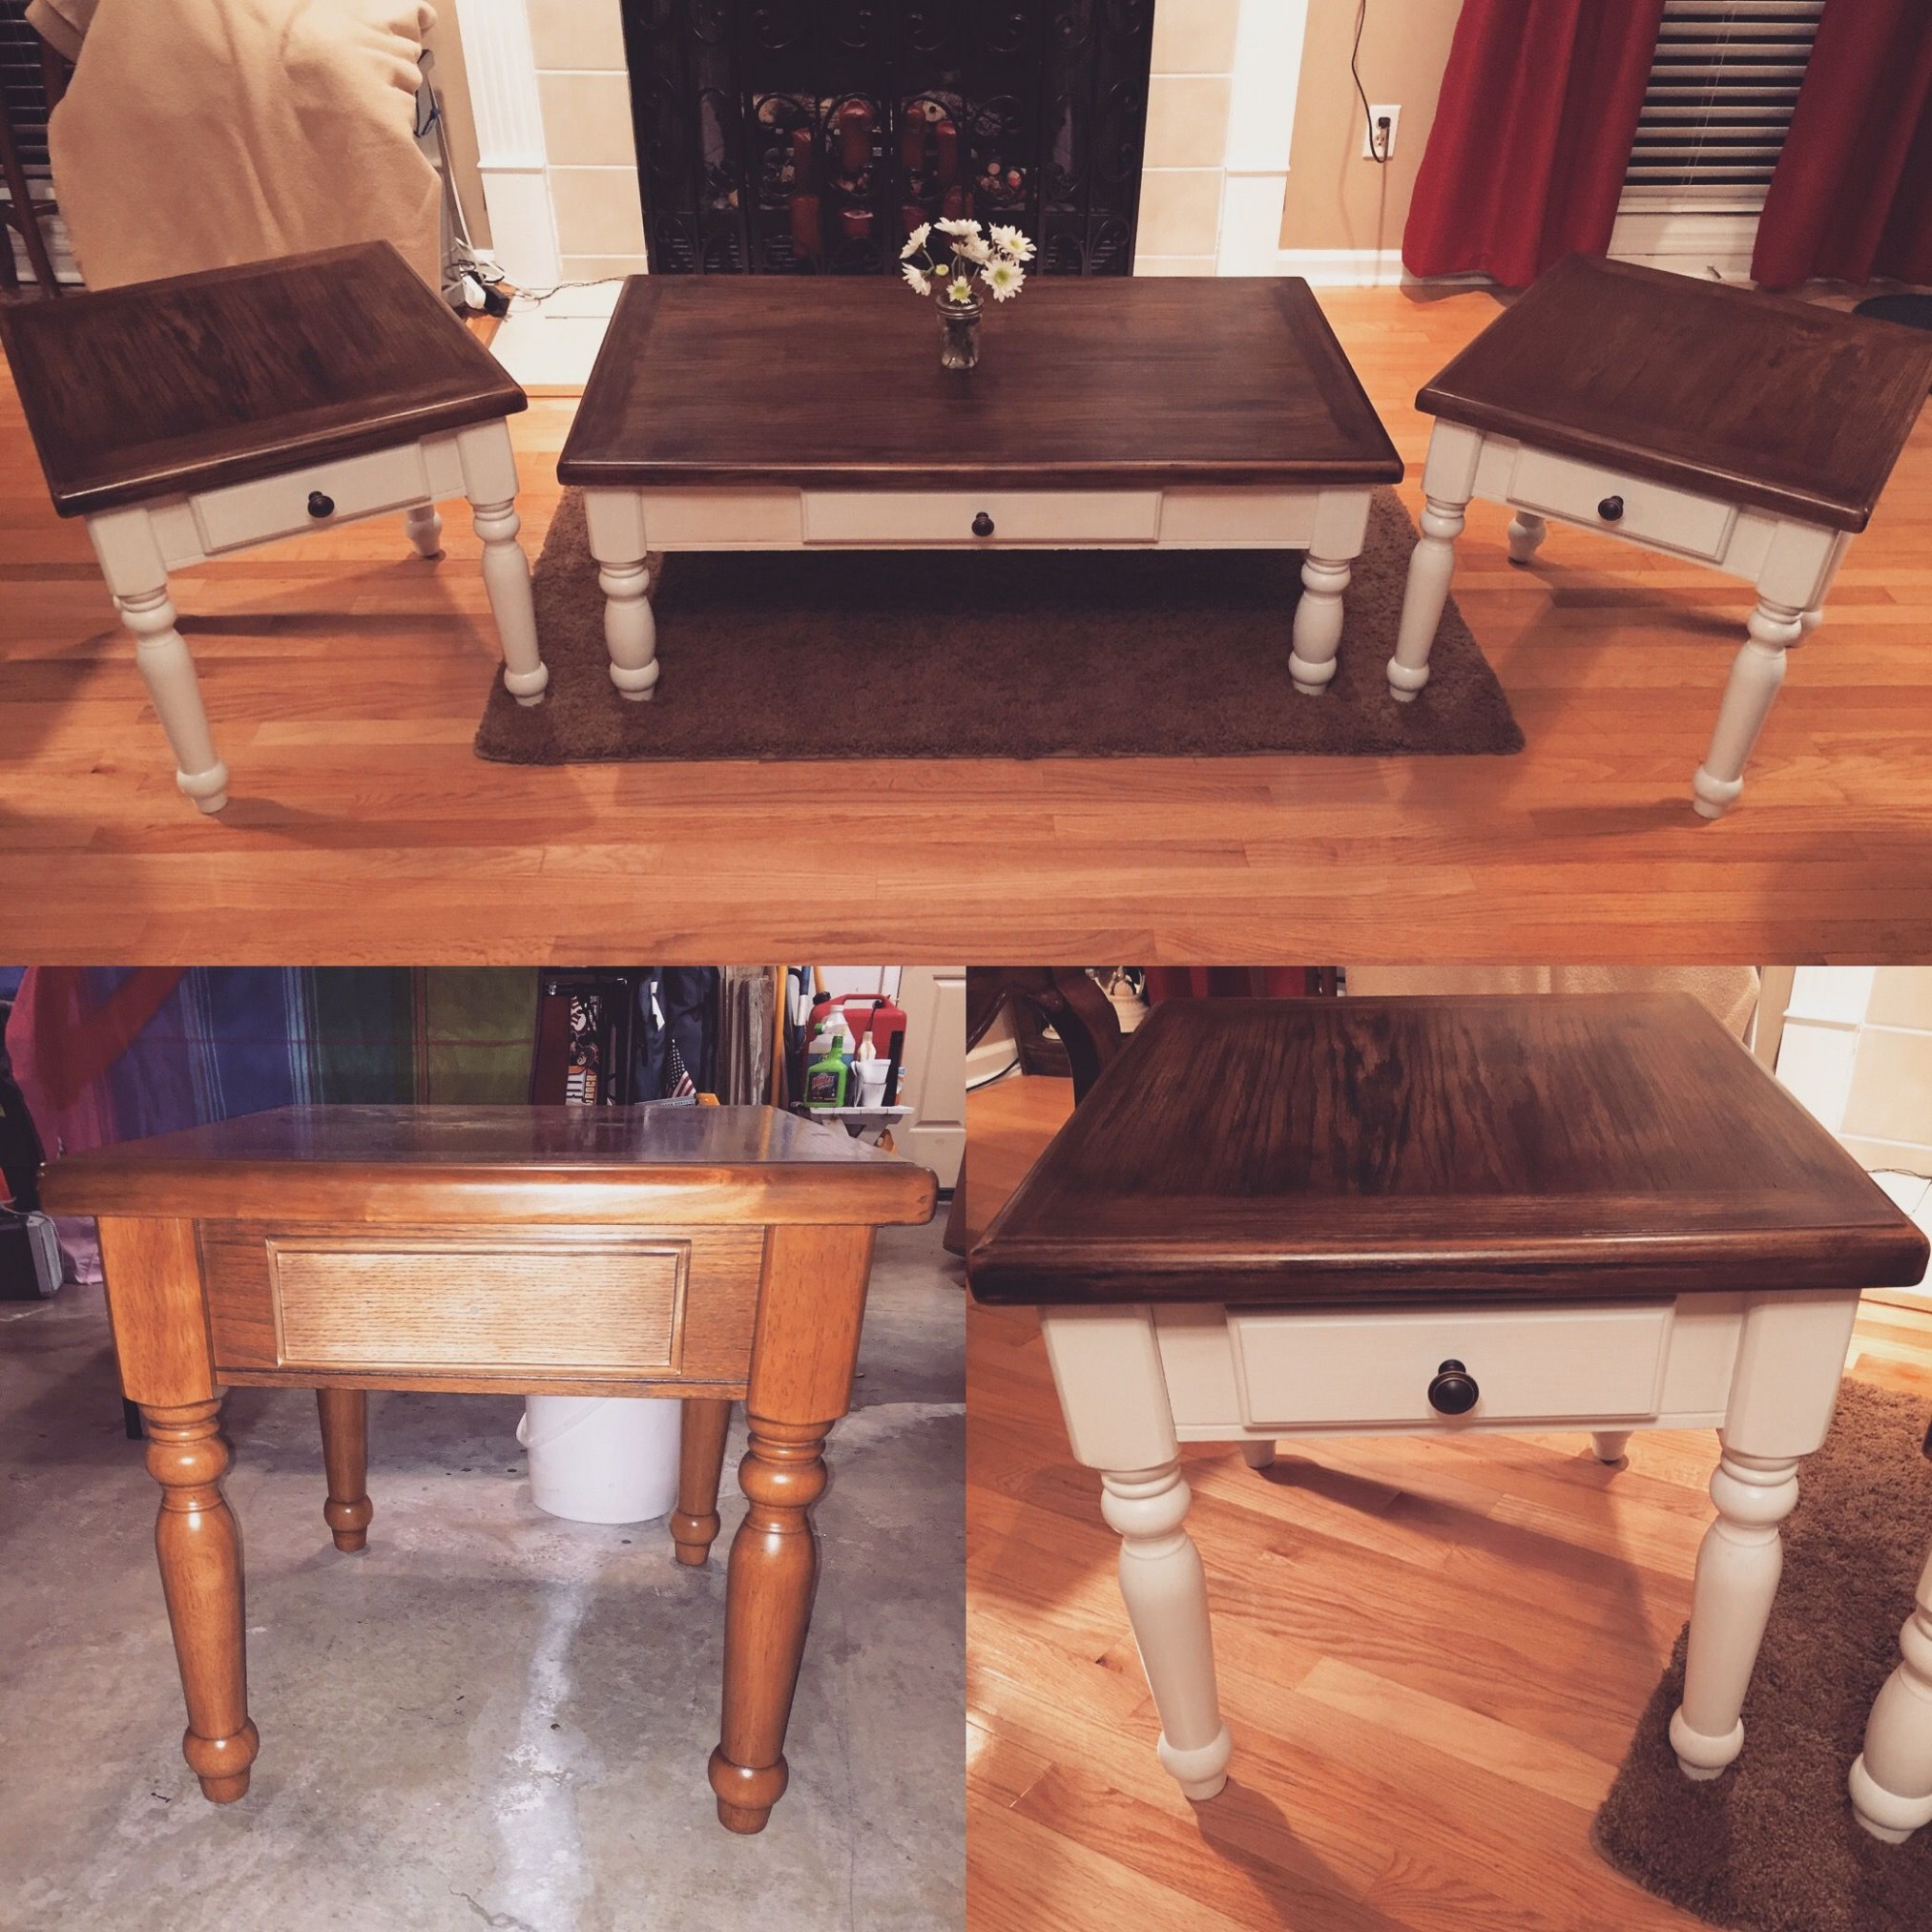 Diy Endtable And Coffee Table~ Minwax Wood Stain Dark ..